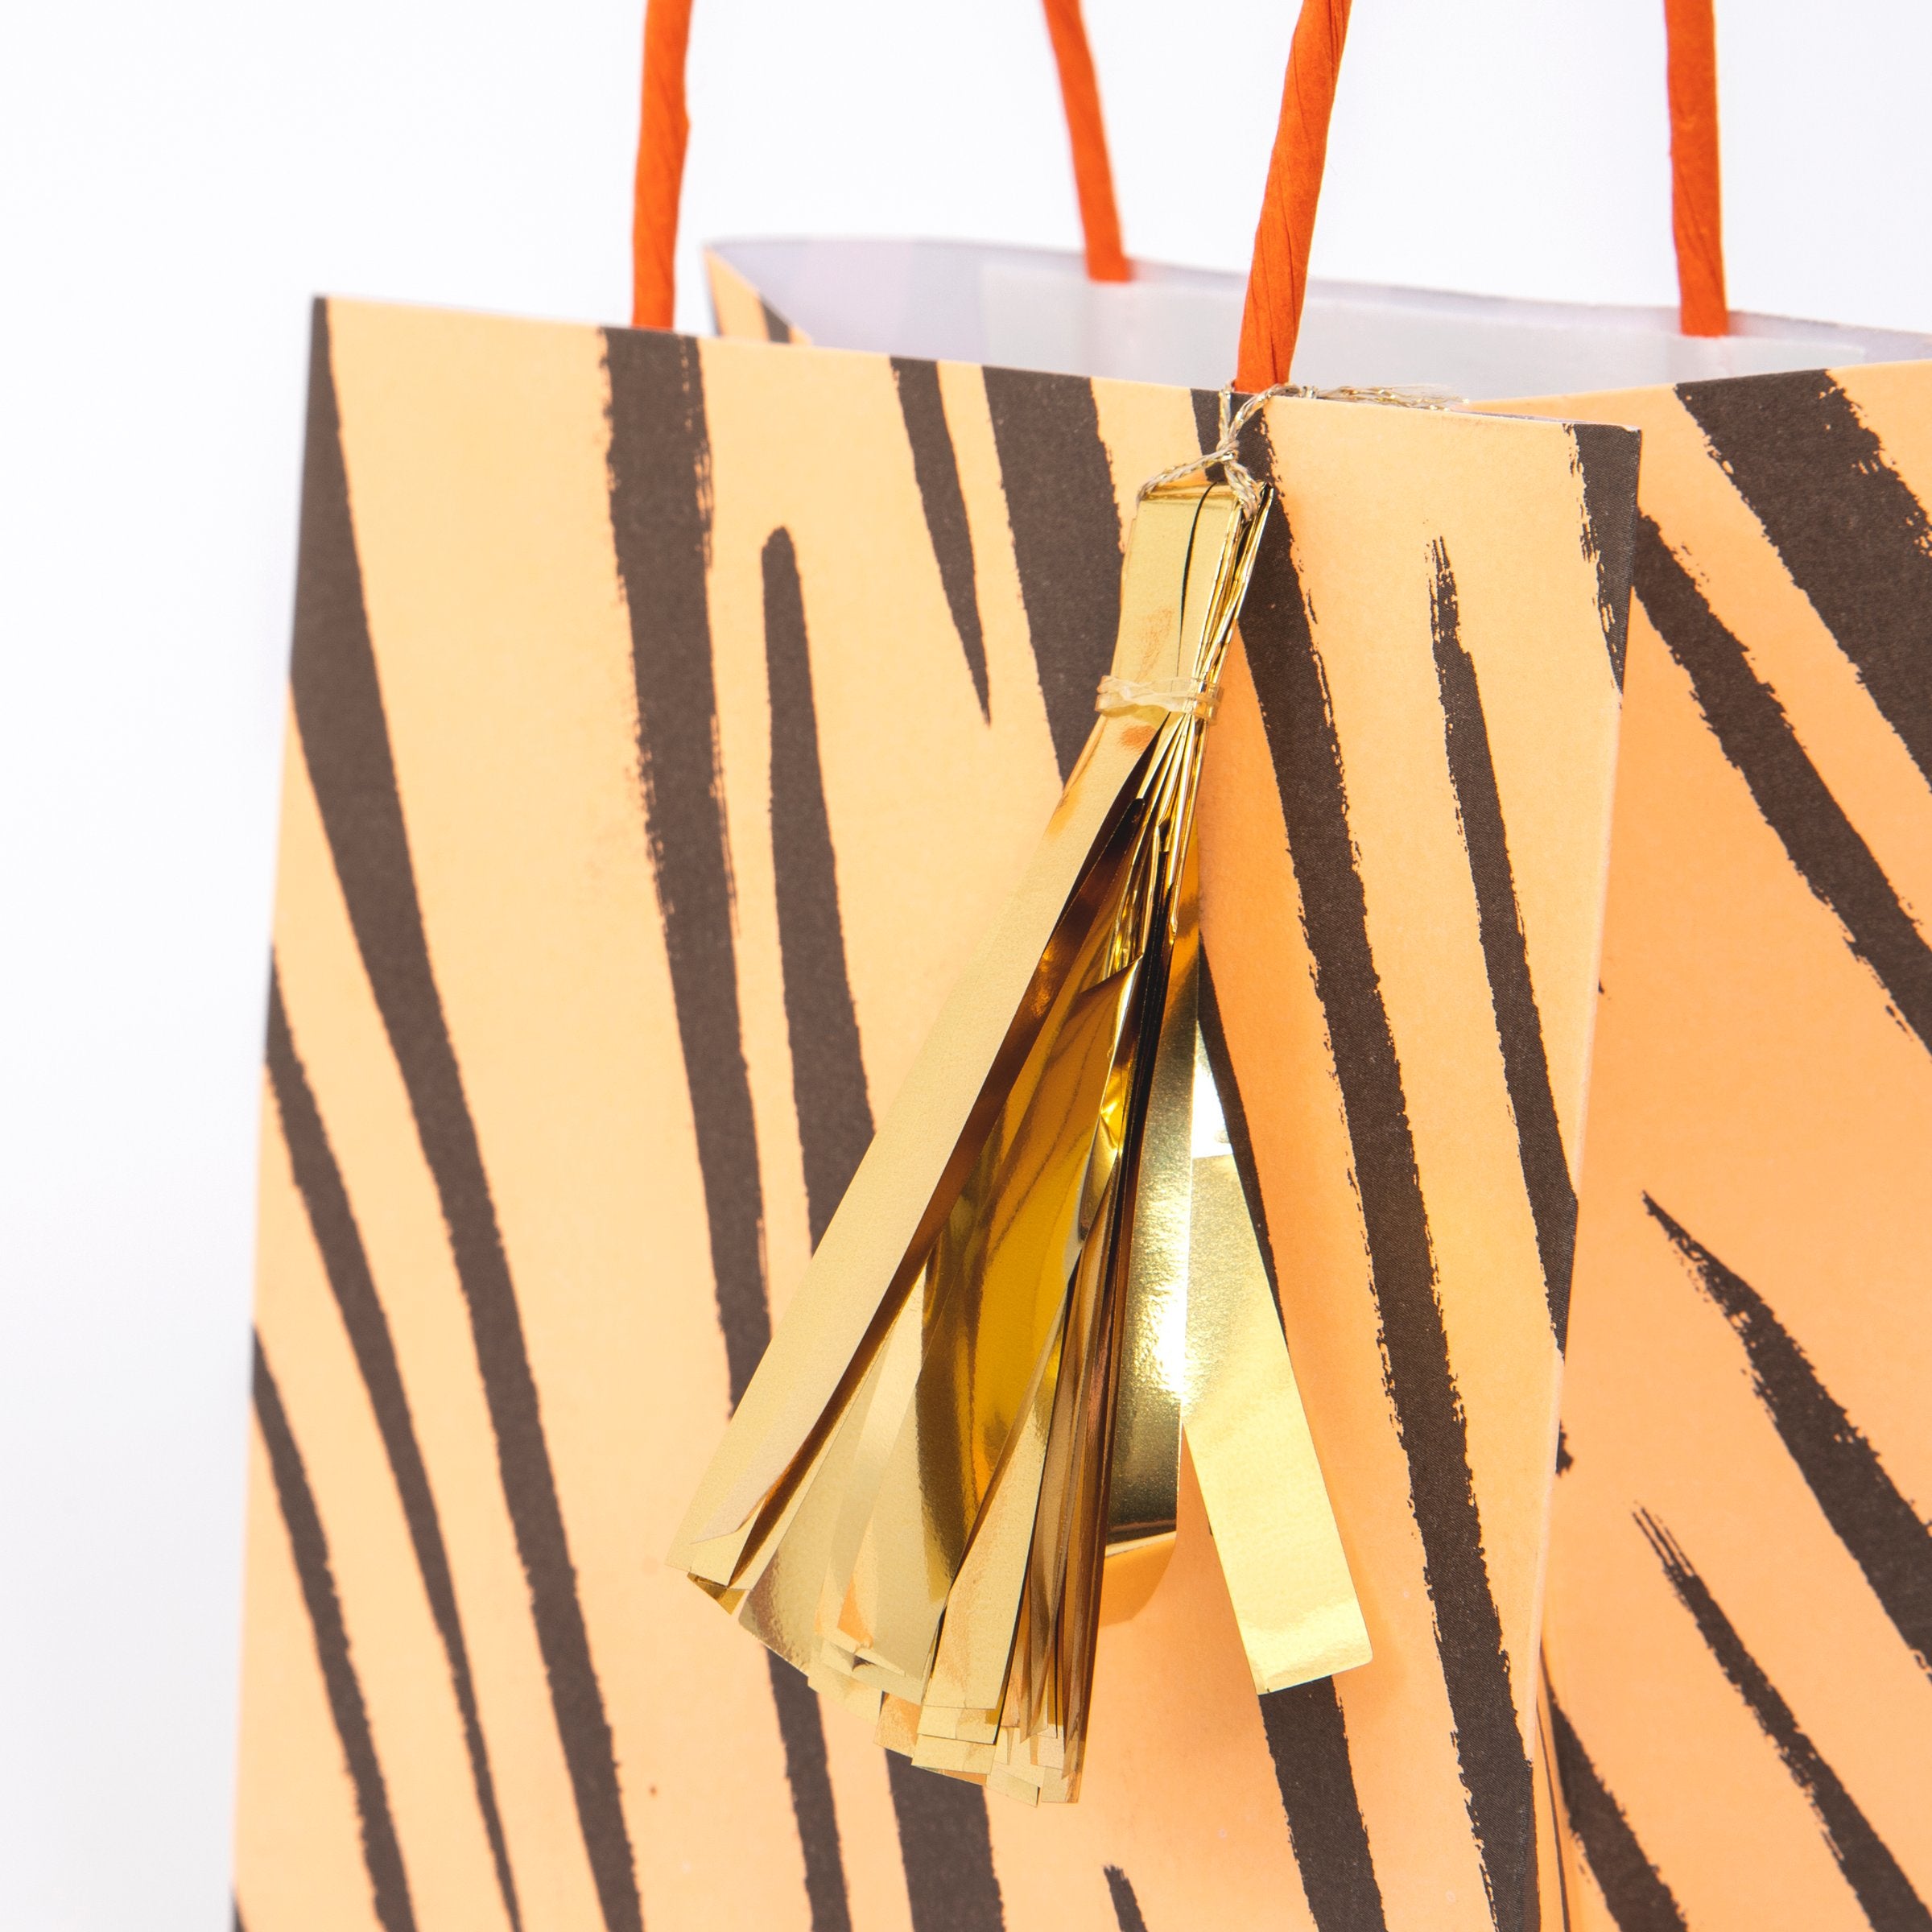 Our party favor bags, with animal prints, are perfect for a safari theme party